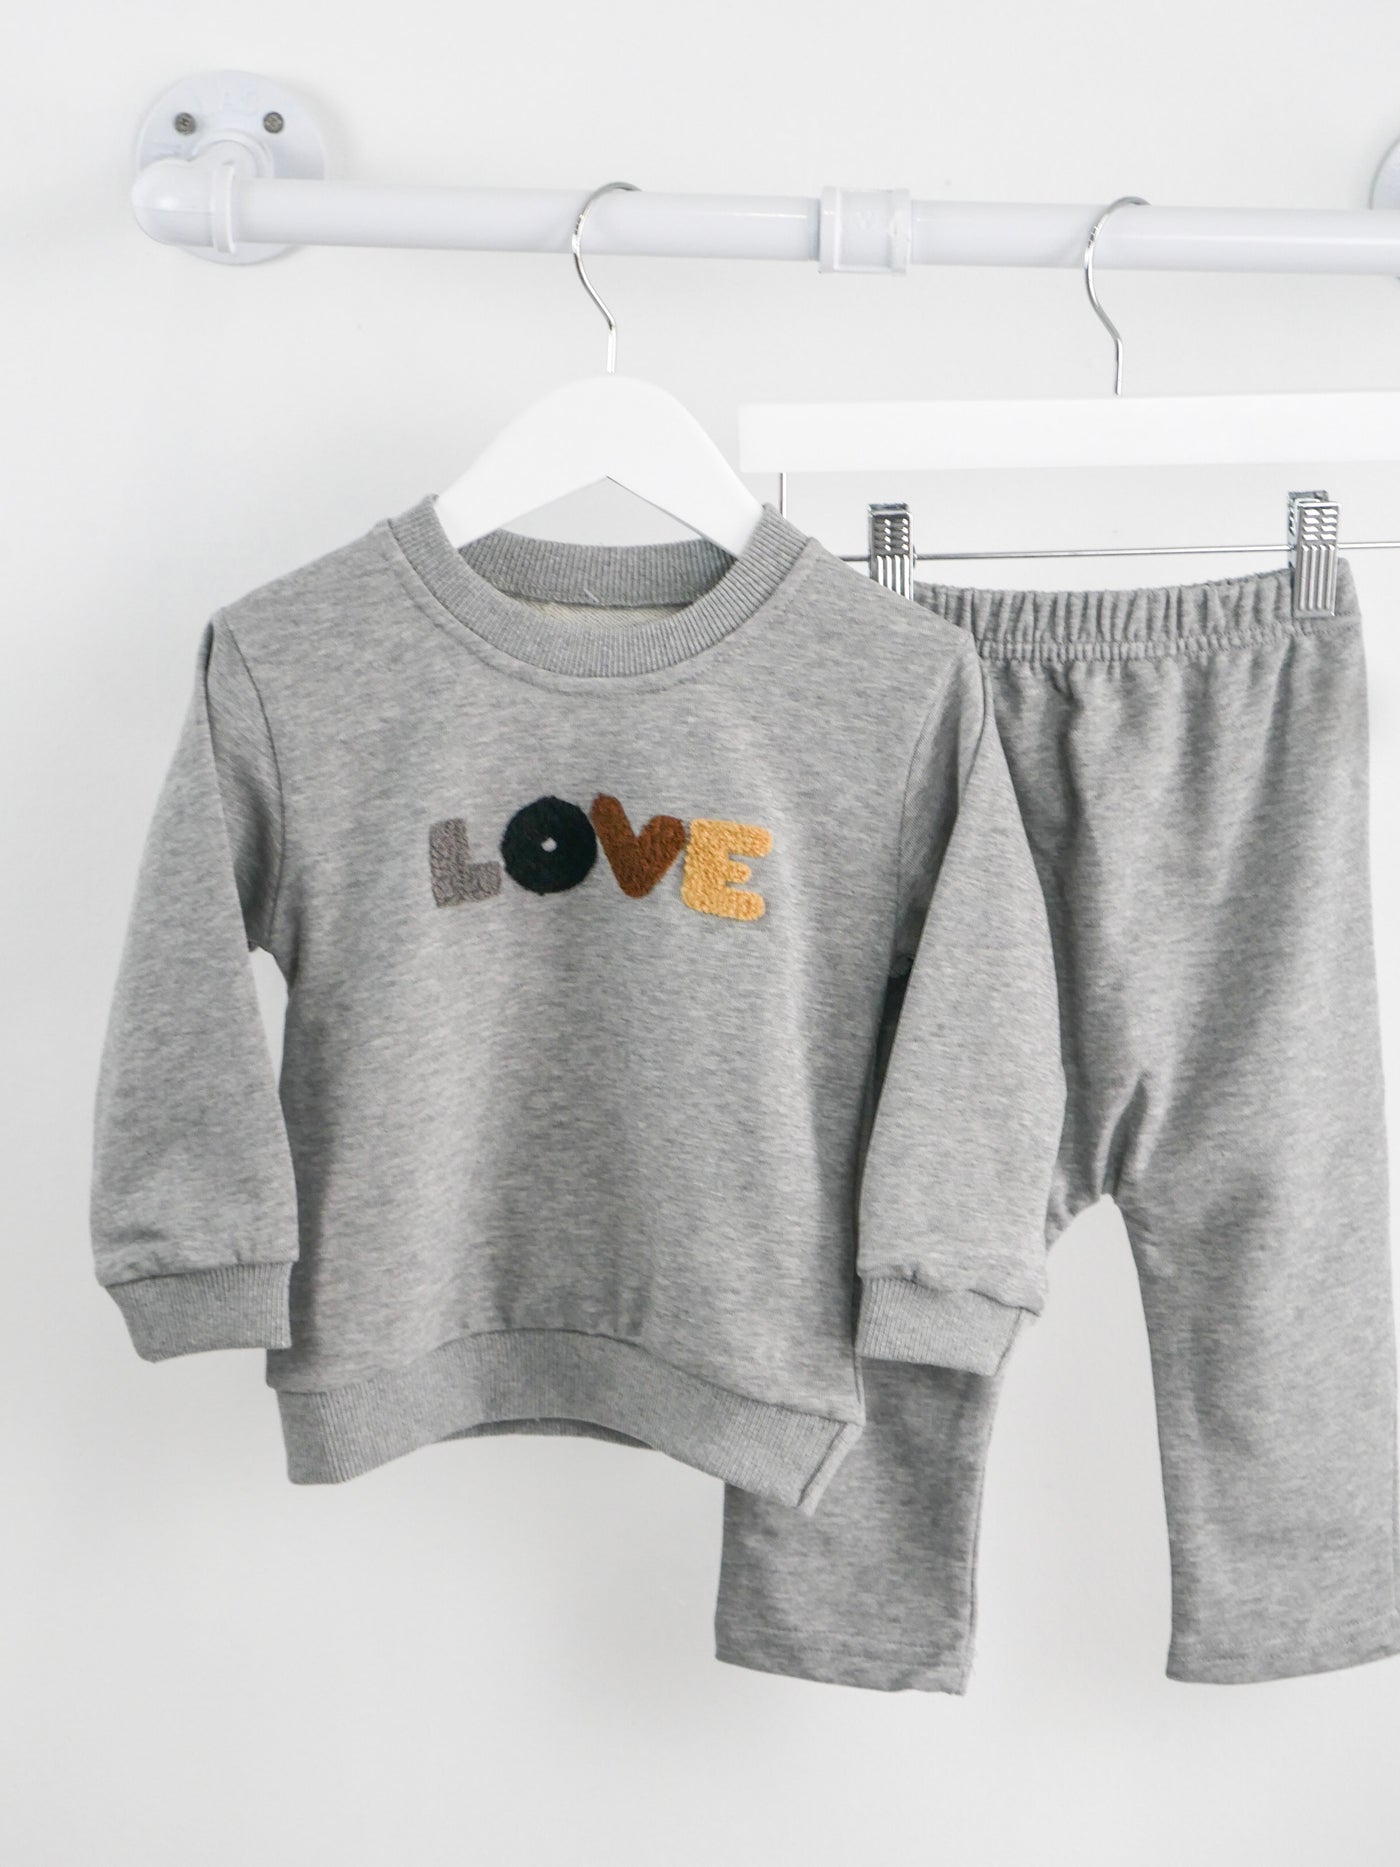 Grey Jogger set with crew neck and chenille in grey, black, brown and beige patches that spell out love